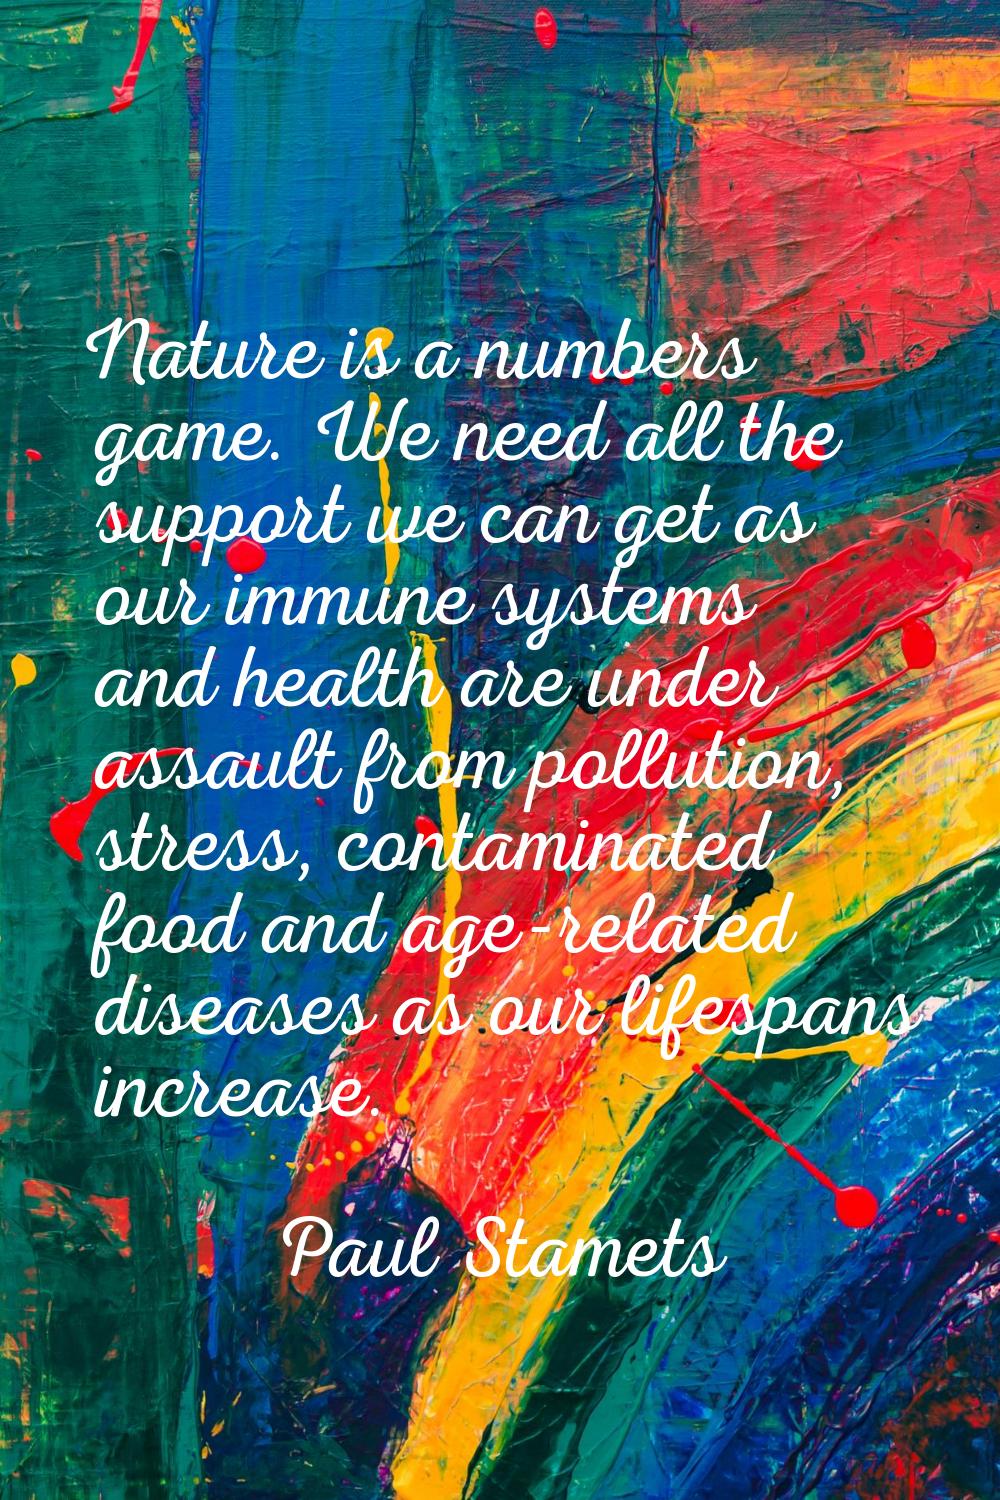 Nature is a numbers game. We need all the support we can get as our immune systems and health are u